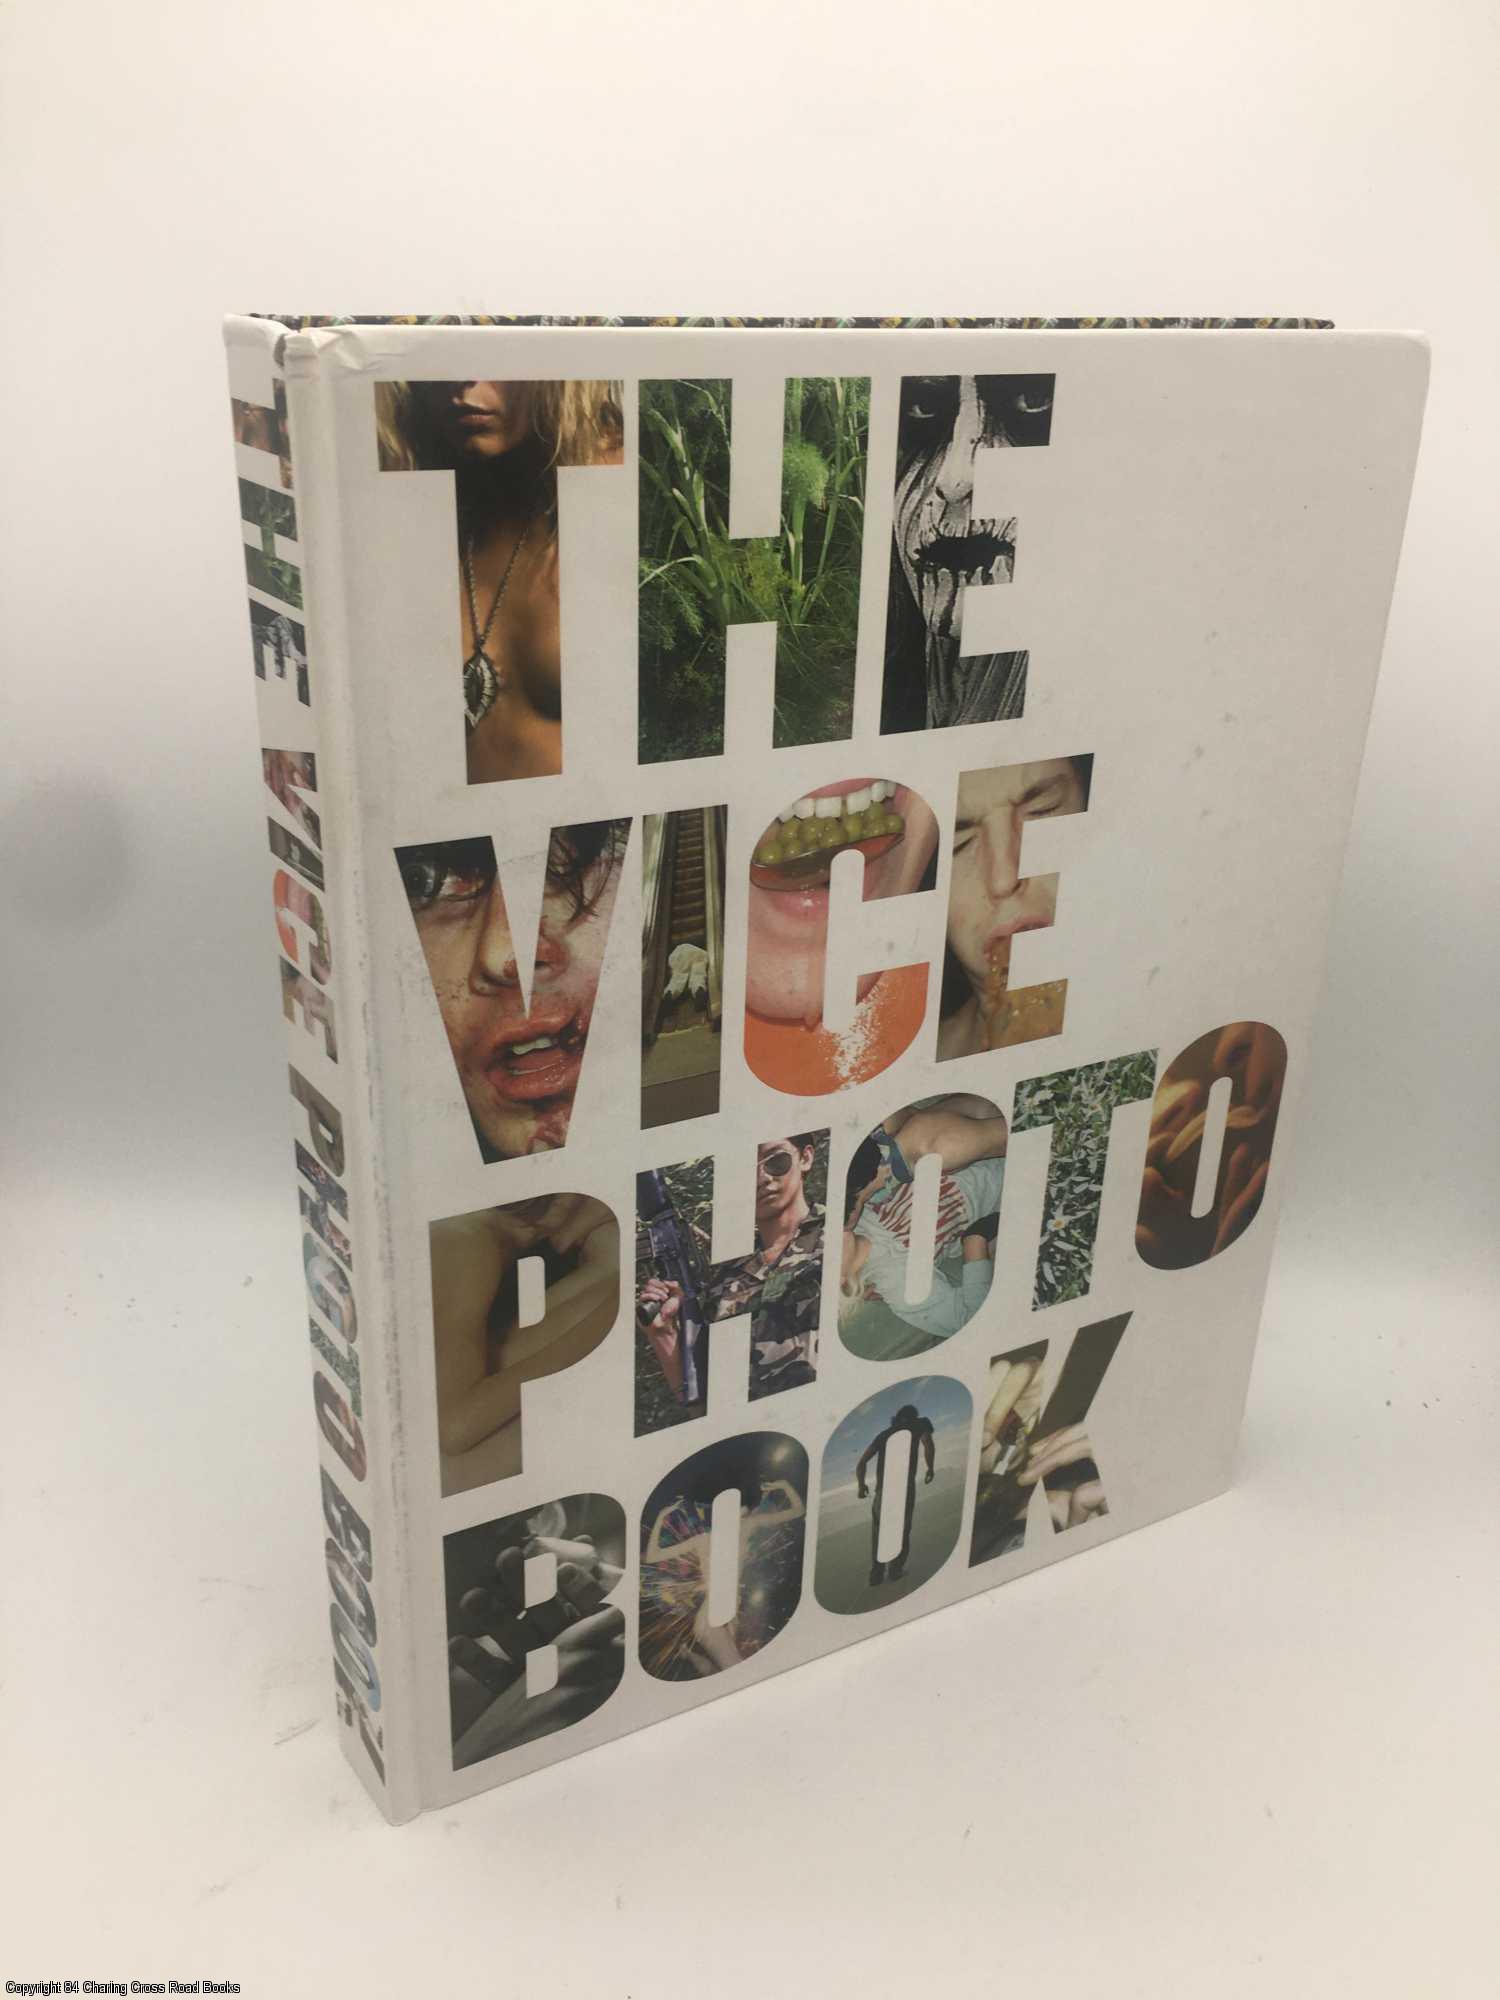 The Vice Photo Book by Vice Magazine on 84 Charing Cross Rare Books